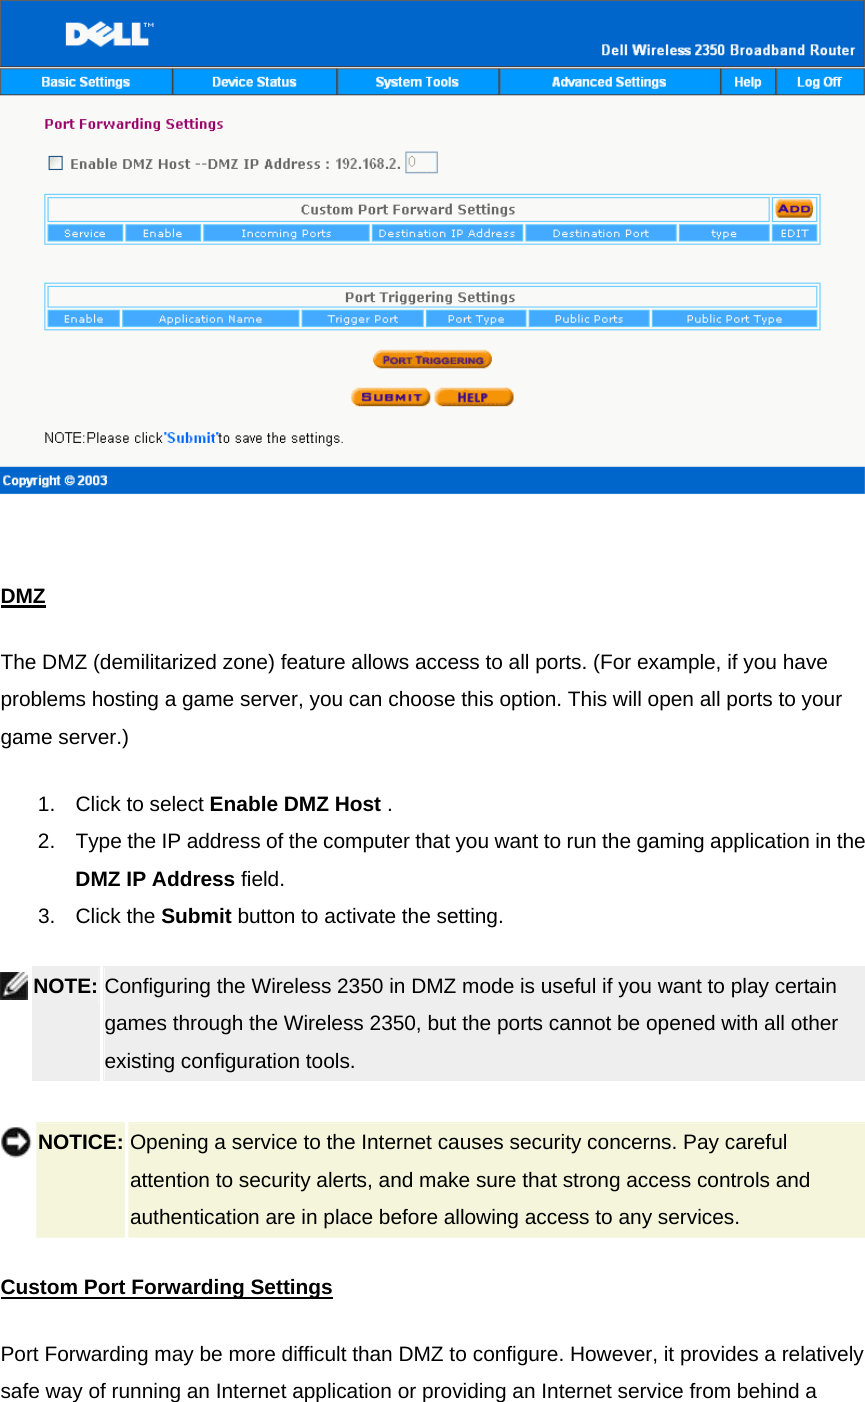    DMZThe DMZ (demilitarized zone) feature allows access to all ports. (For example, if you have problems hosting a game server, you can choose this option. This will open all ports to your game server.)   1.  Click to select Enable DMZ Host .   2.  Type the IP address of the computer that you want to run the gaming application in the DMZ IP Address field.   3. Click the Submit button to activate the setting.  NOTE: Configuring the Wireless 2350 in DMZ mode is useful if you want to play certain games through the Wireless 2350, but the ports cannot be opened with all other existing configuration tools.      NOTICE: Opening a service to the Internet causes security concerns. Pay careful attention to security alerts, and make sure that strong access controls and authentication are in place before allowing access to any services. Custom Port Forwarding SettingsPort Forwarding may be more difficult than DMZ to configure. However, it provides a relatively safe way of running an Internet application or providing an Internet service from behind a 